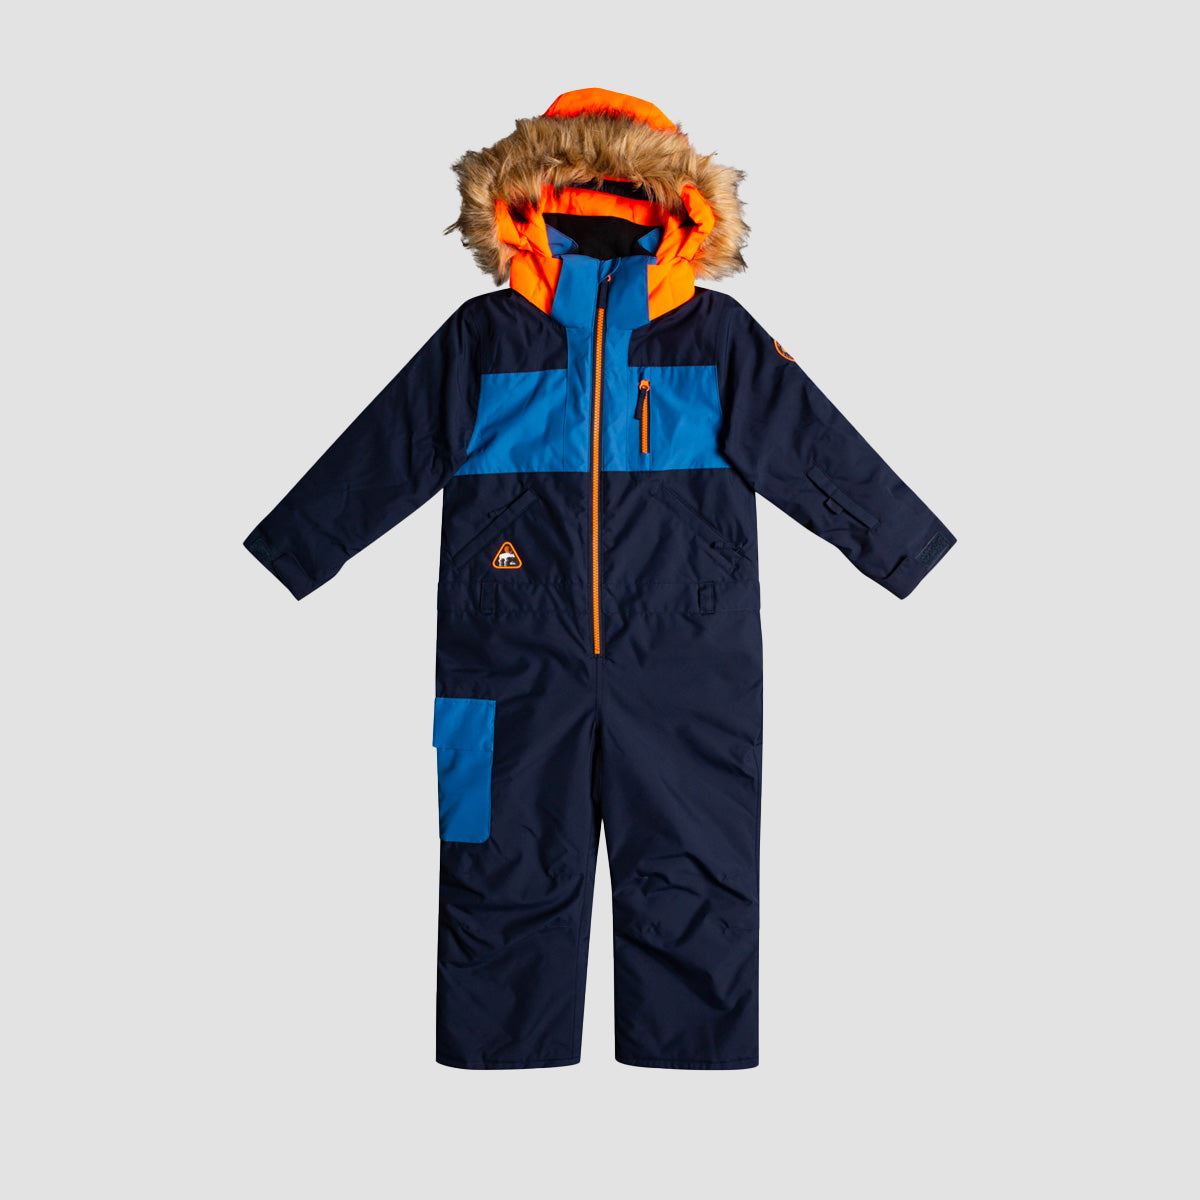 Quiksilver Rookie Snow Suit 2-7 Years Insignia Blue - Kids